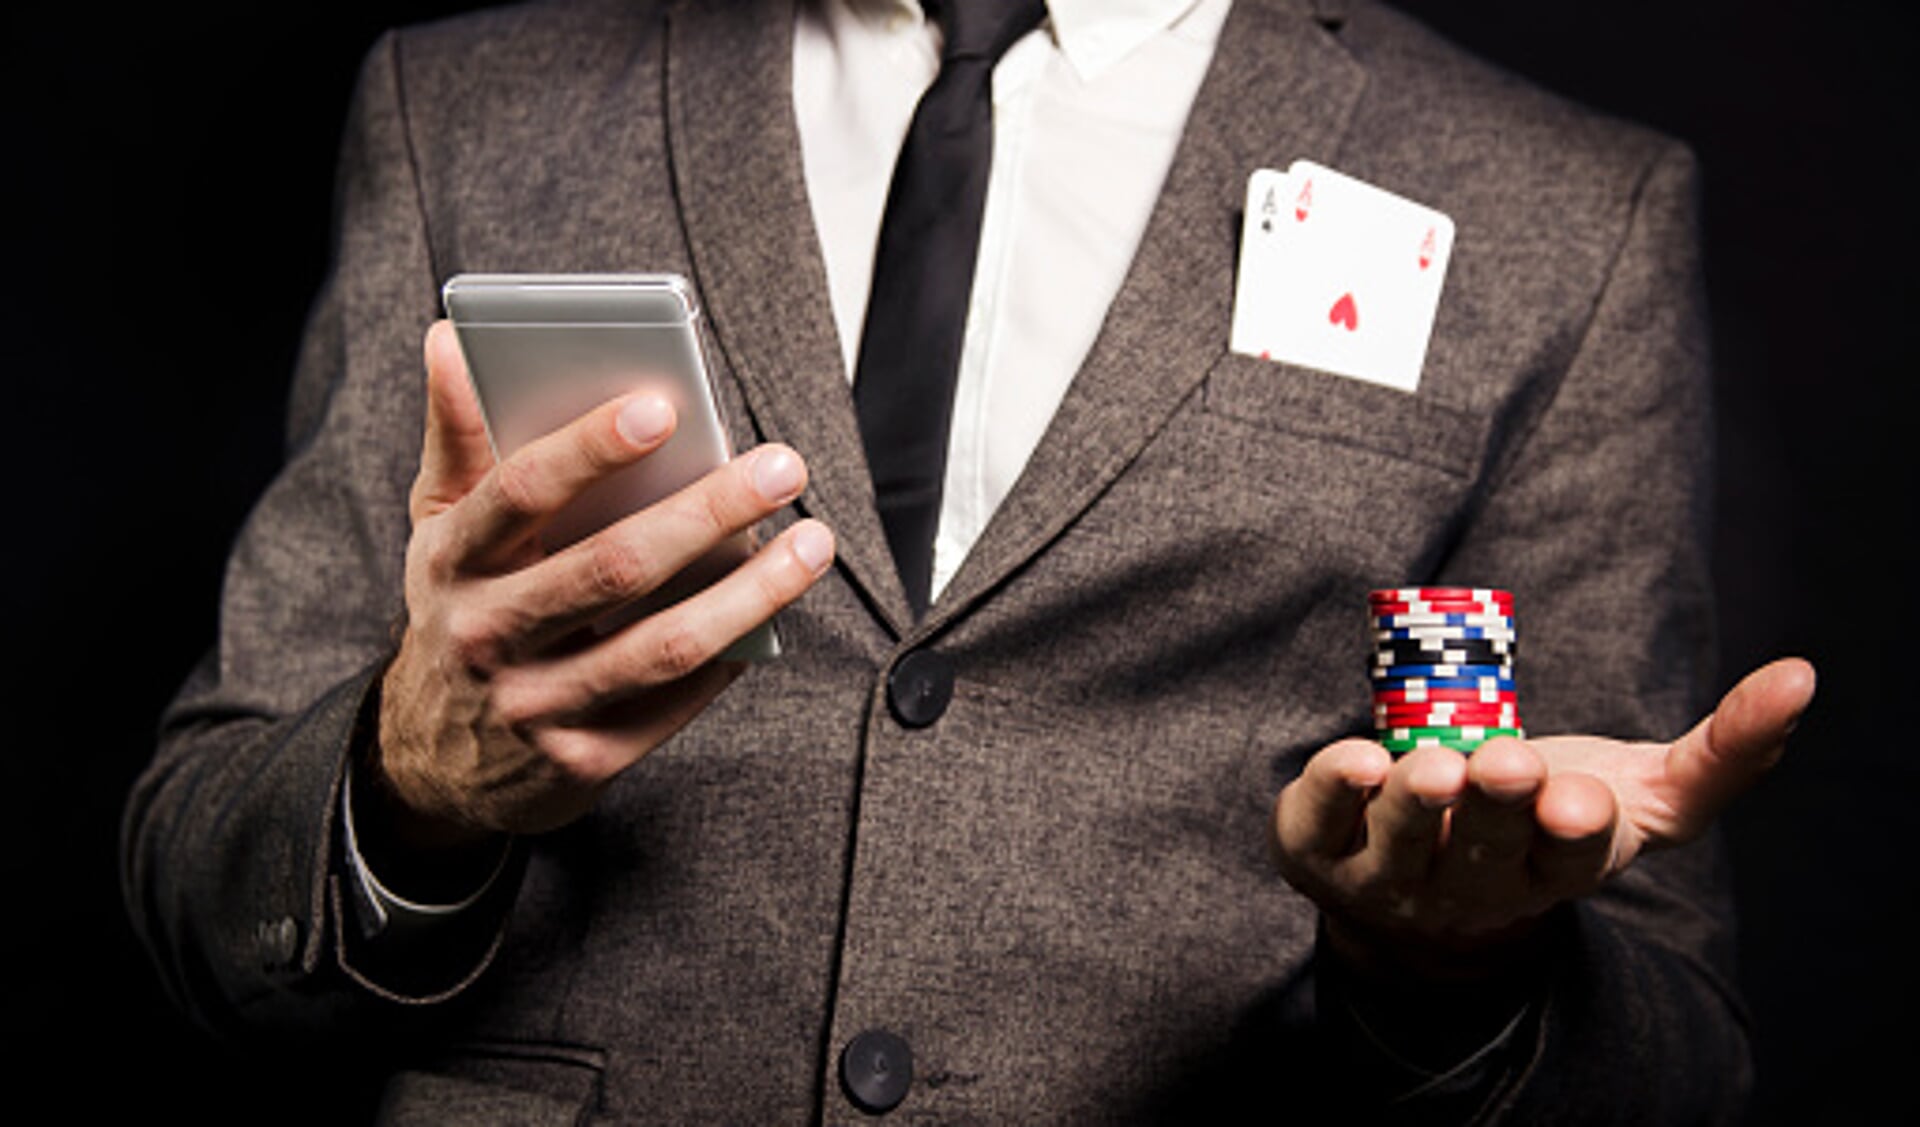 Man in suit with to aces in pocket holding poker chips and smartphone/ online poker